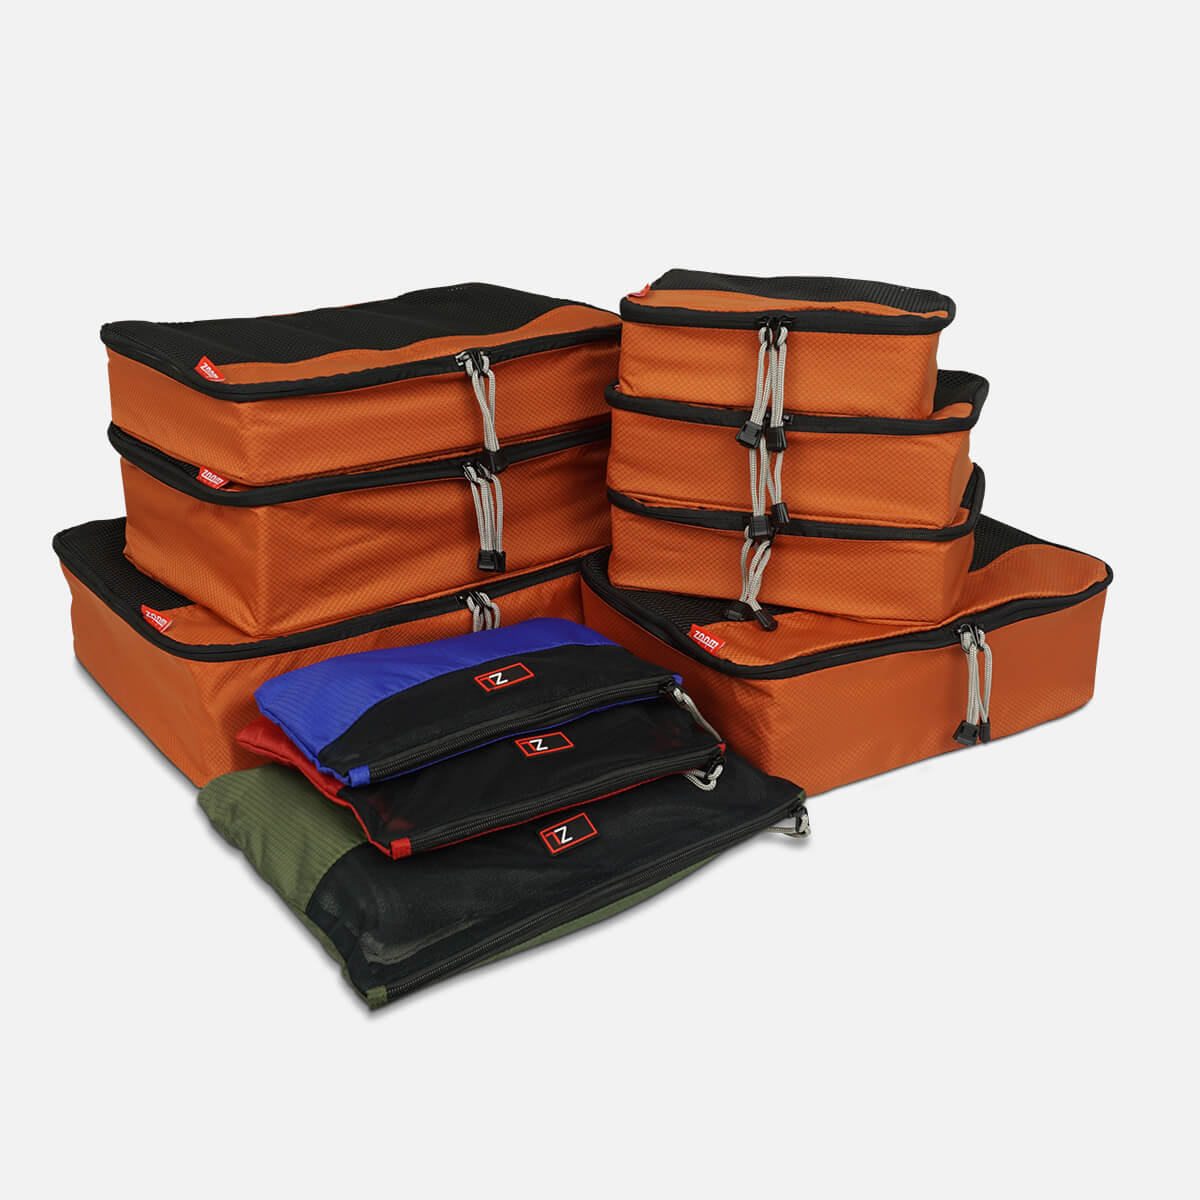 Zoomlite Packing Cubes Travel Organisers Ultimate 10 Pcs Set - fit so much in and save so much space they ve changed the way i pack and travel love them